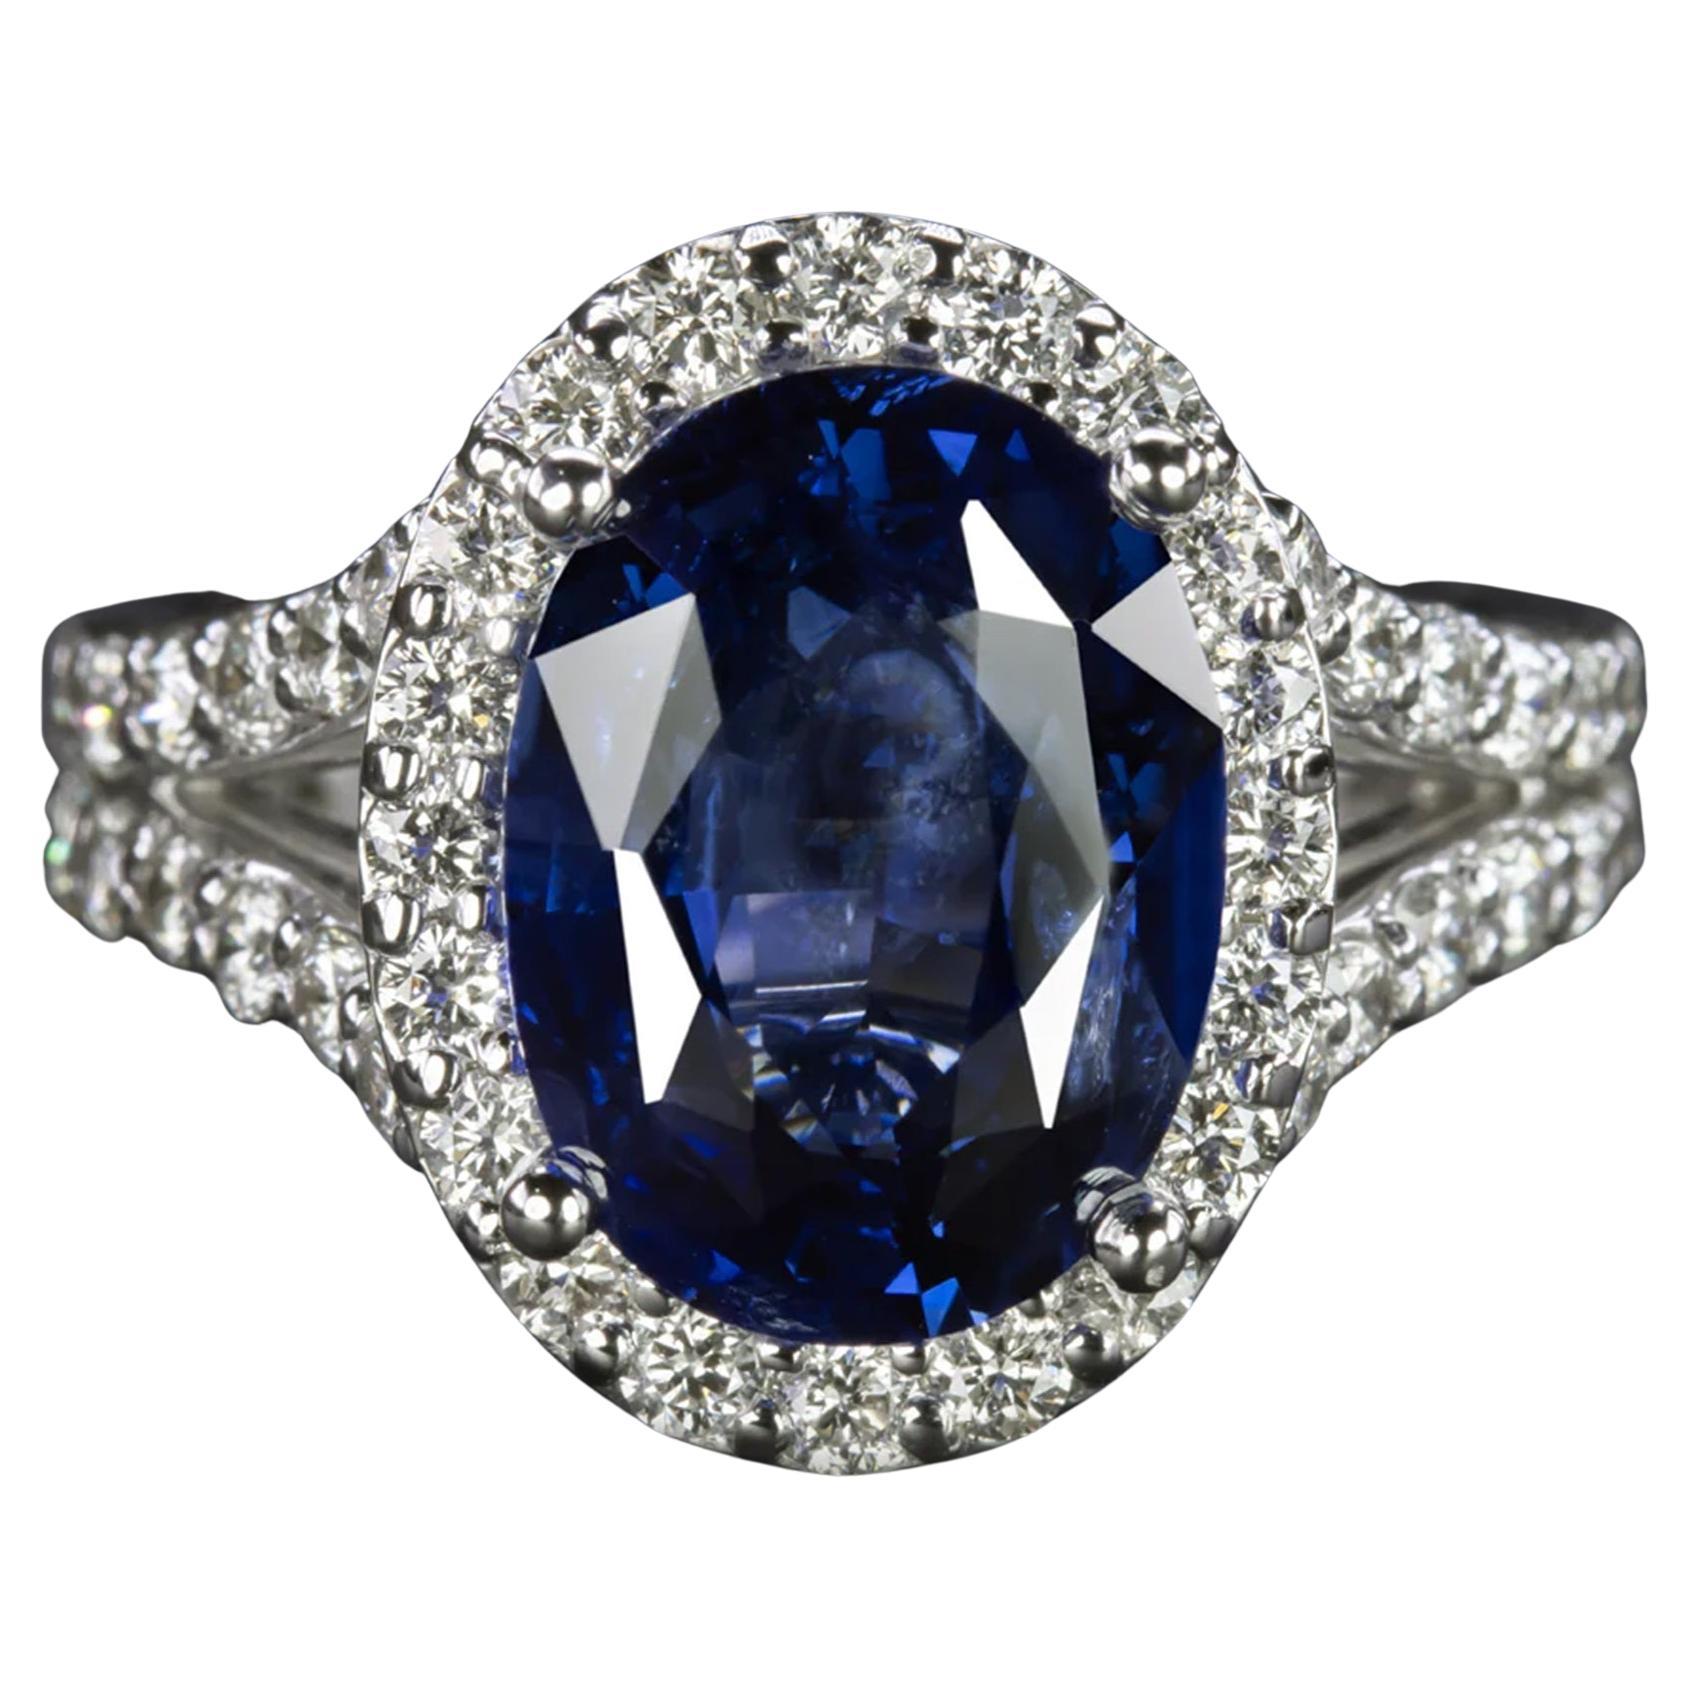 GIA Certified 5.45 Carat Blue Sapphire Diamond Ring For Sale